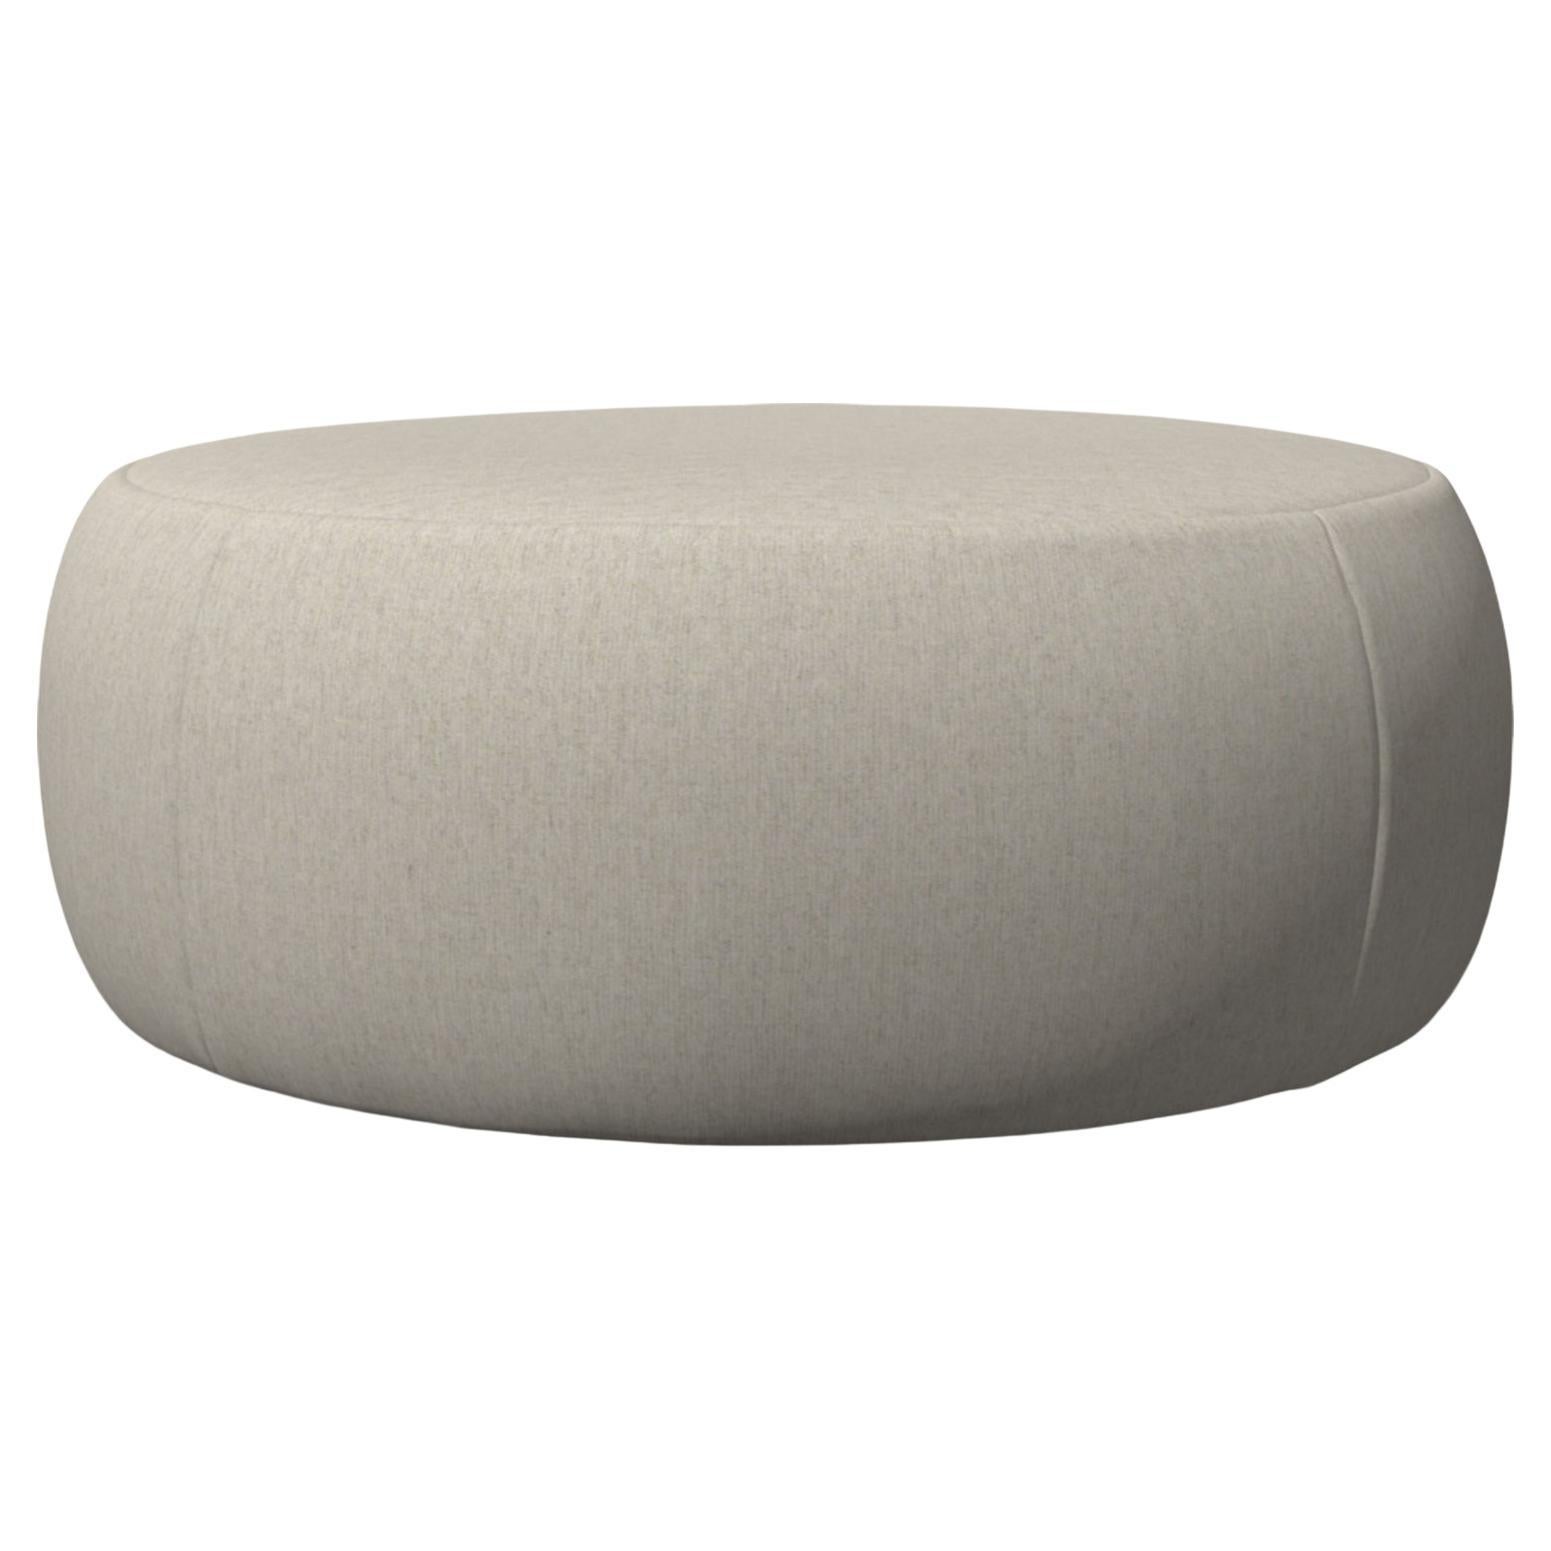 Moooi Pooof Large Pouf in Liscio, Nebbia Light Grey Upholstery For Sale